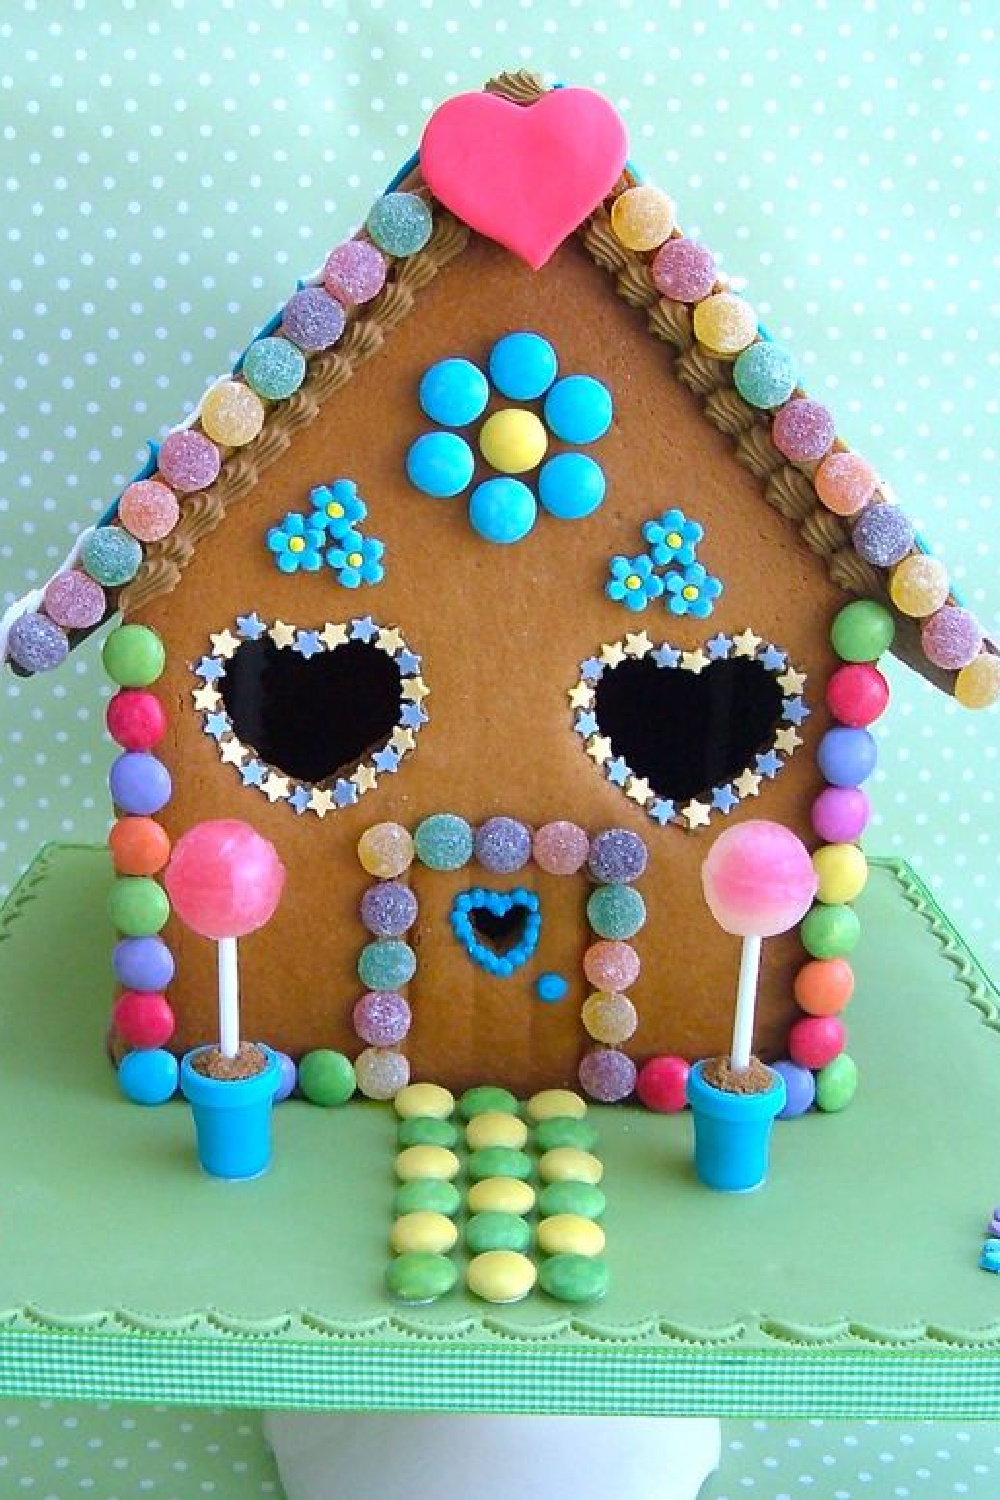 Adorable gingerbread house with hearts, stars, and pink